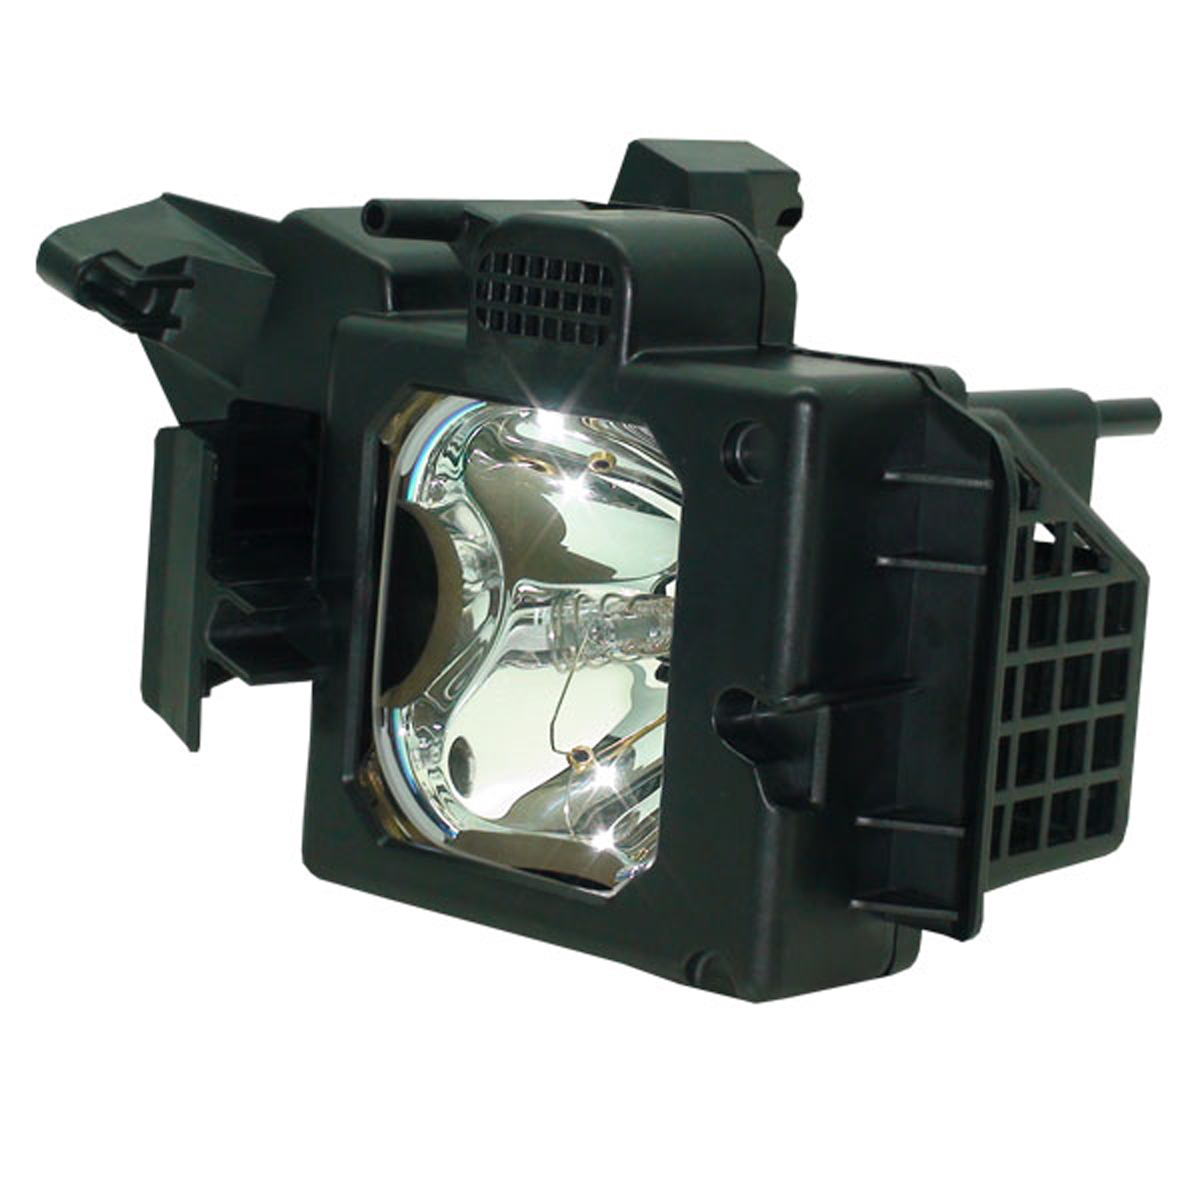 F93087500 / A1129776A / XL-2400 / A1127024A Lamp for SONY KDF E50A11E